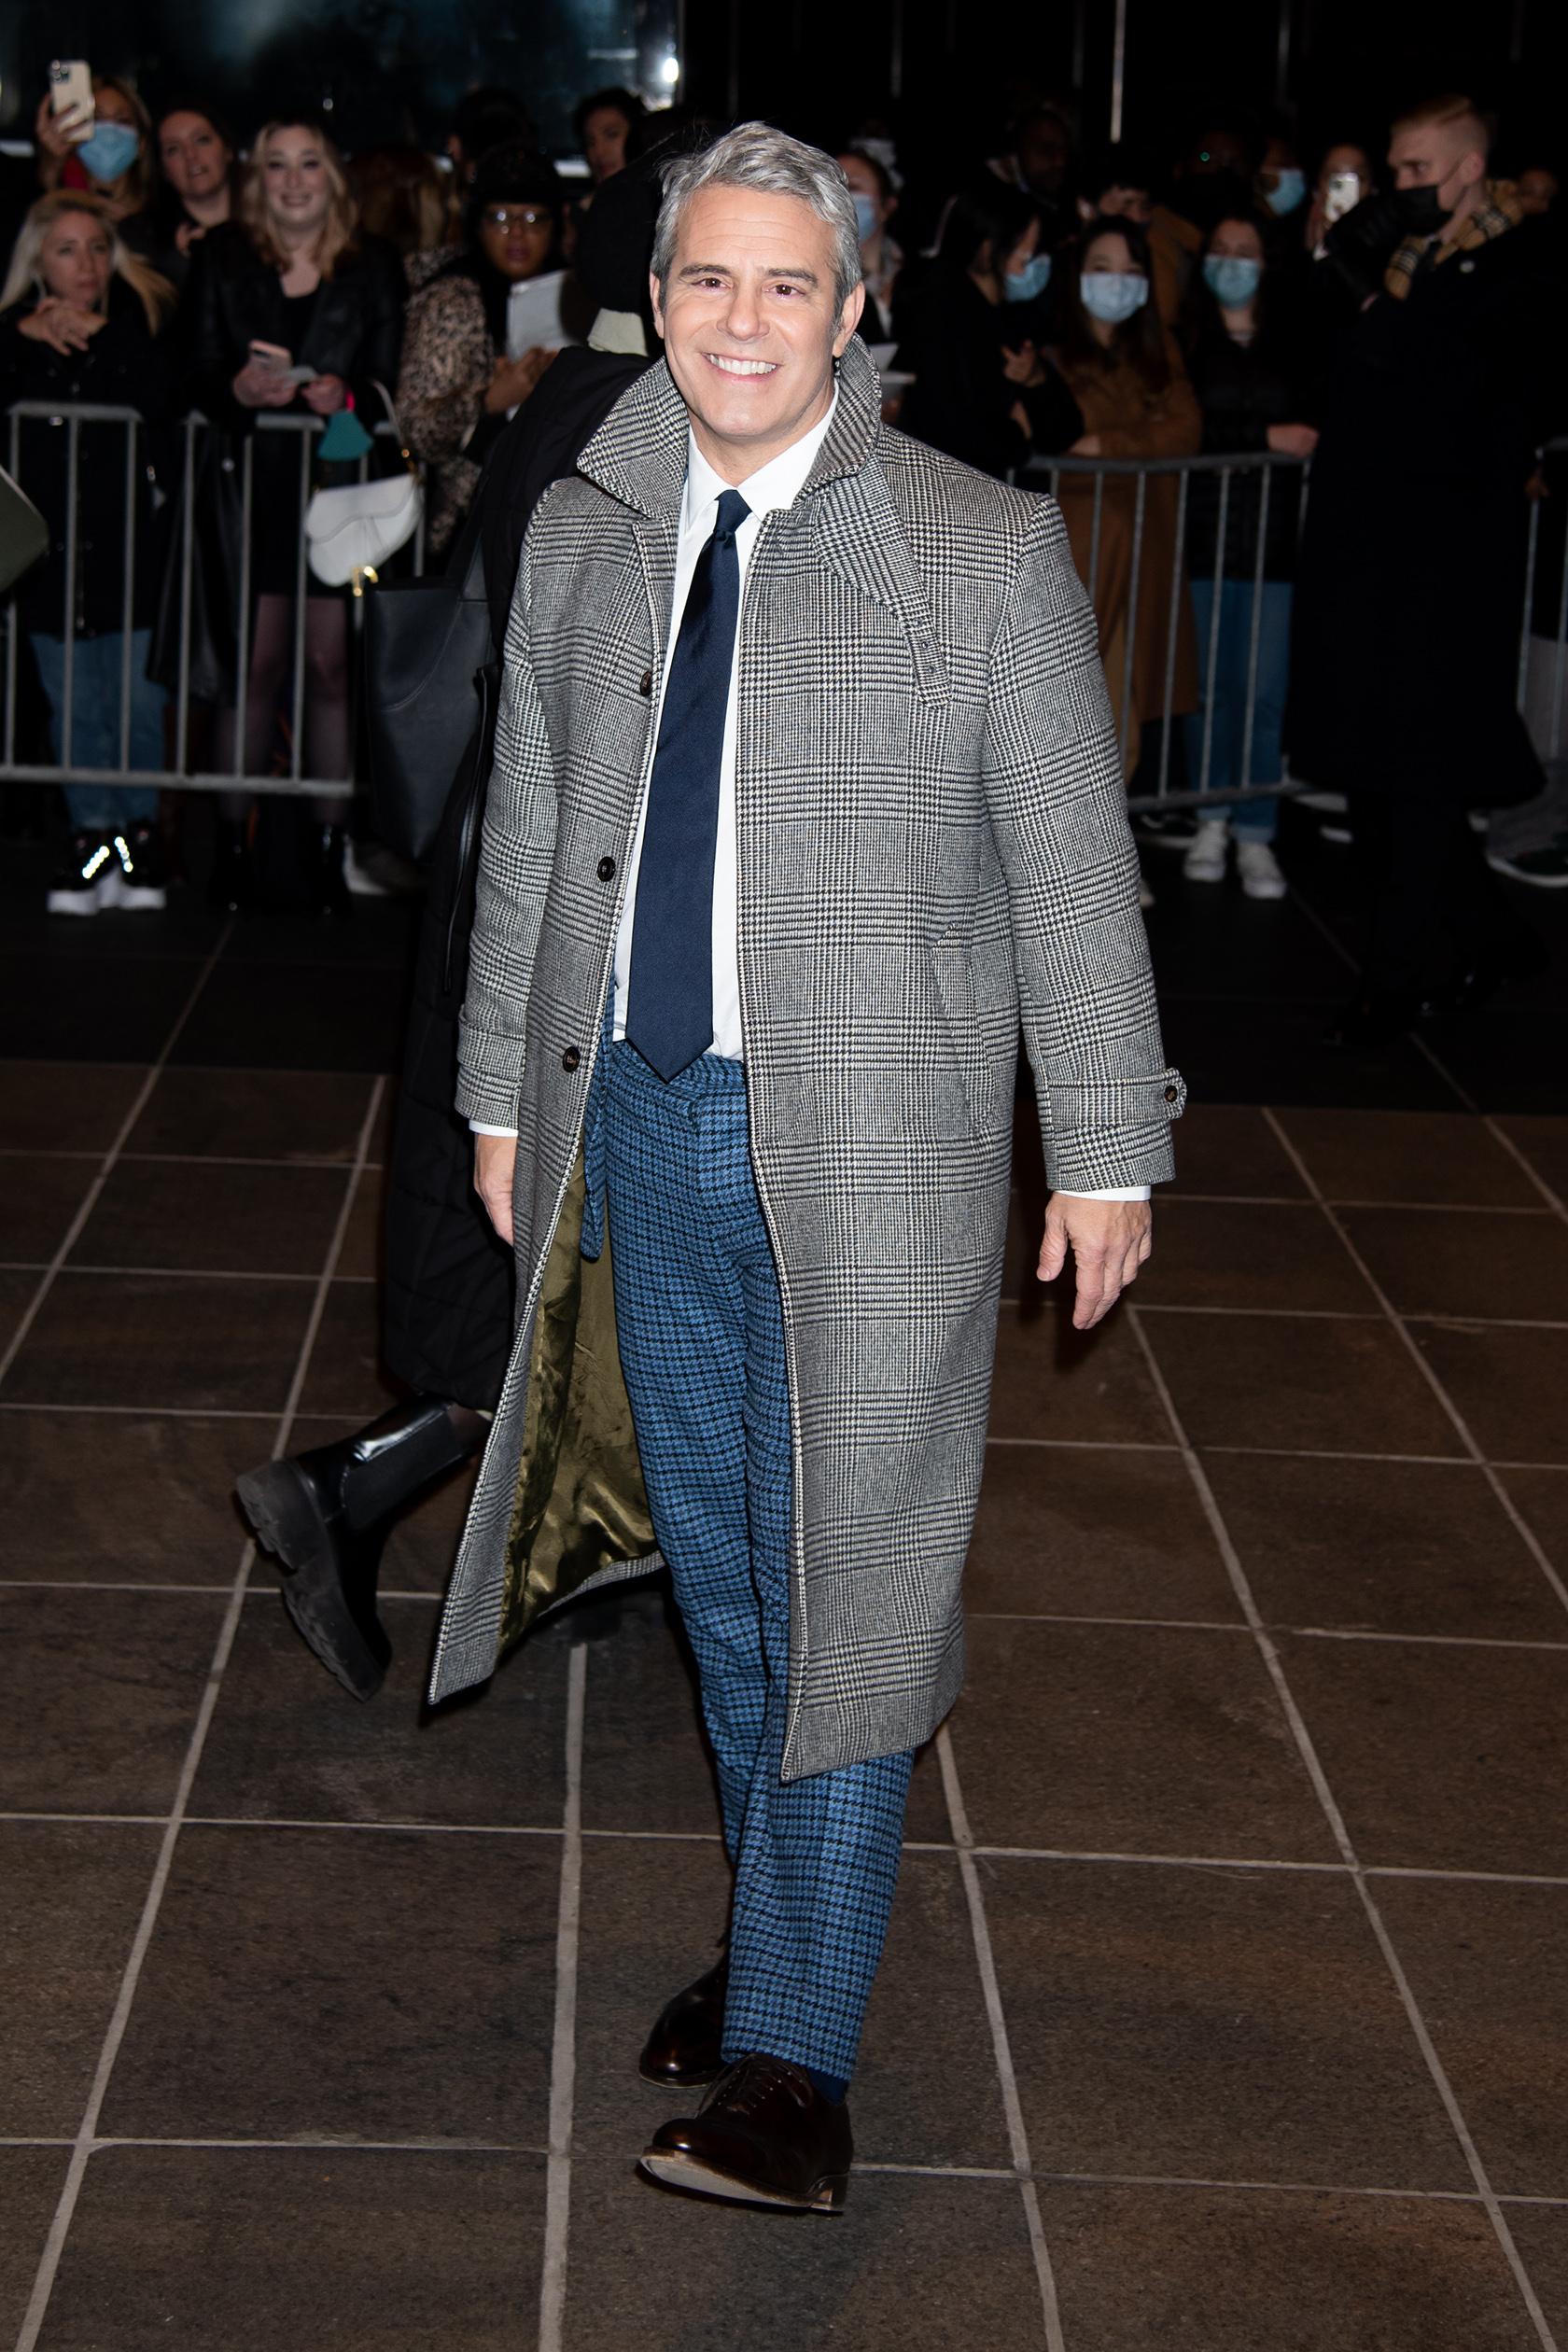 Andy Cohen at "House of Gucci" NYC Screening